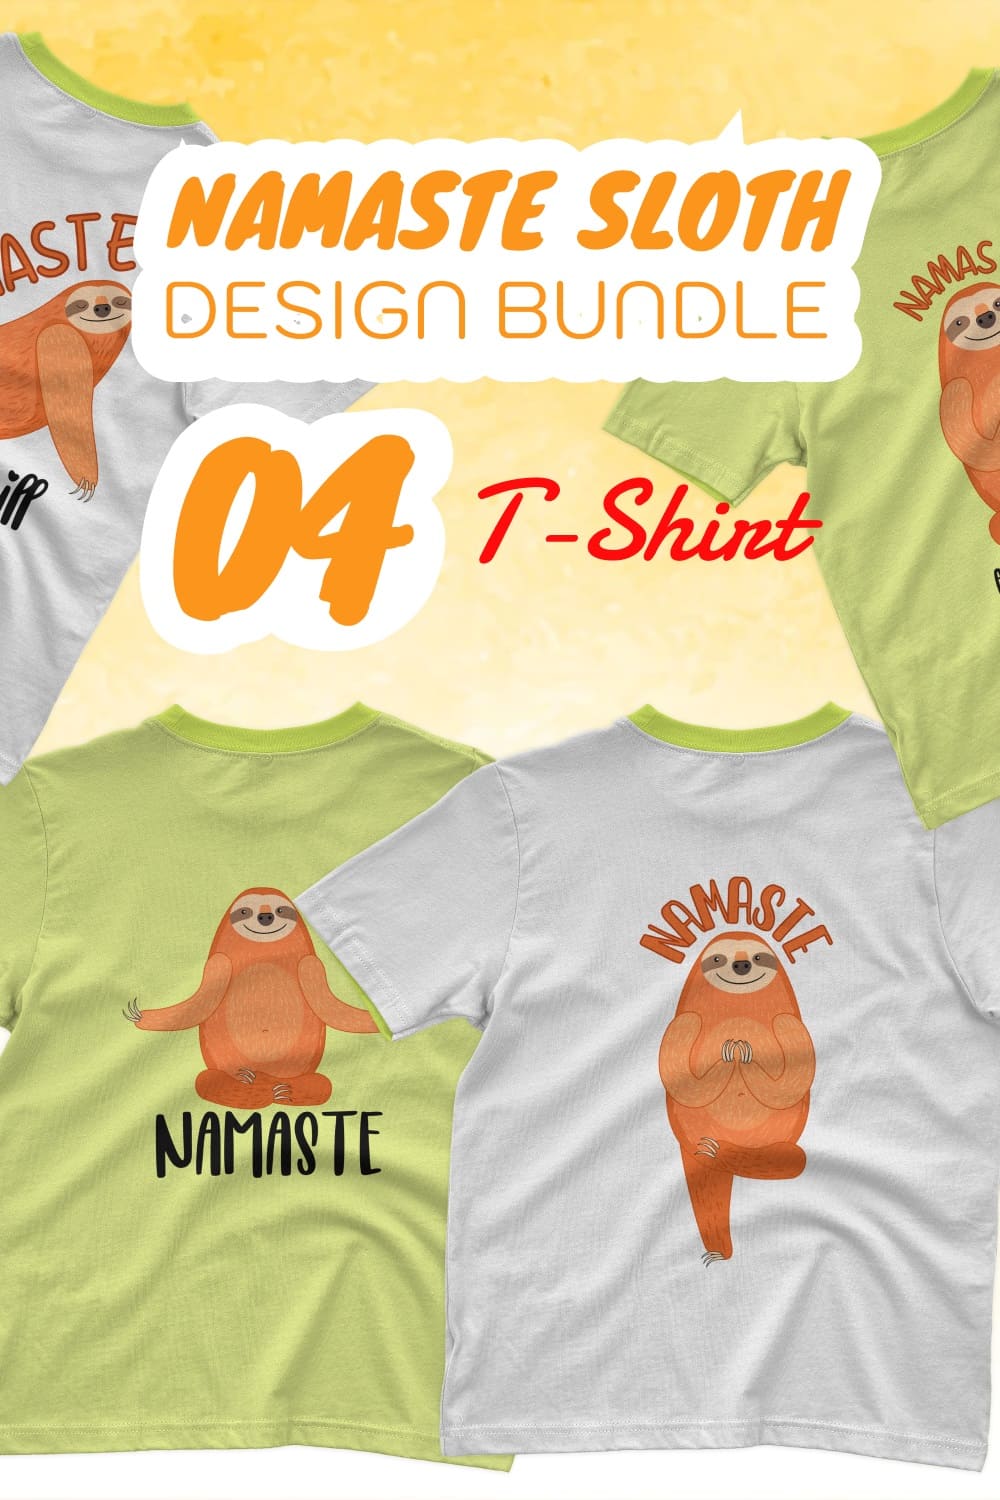 A bright image of sloths performing yoga exercises is depicted on colorful t-shirts.